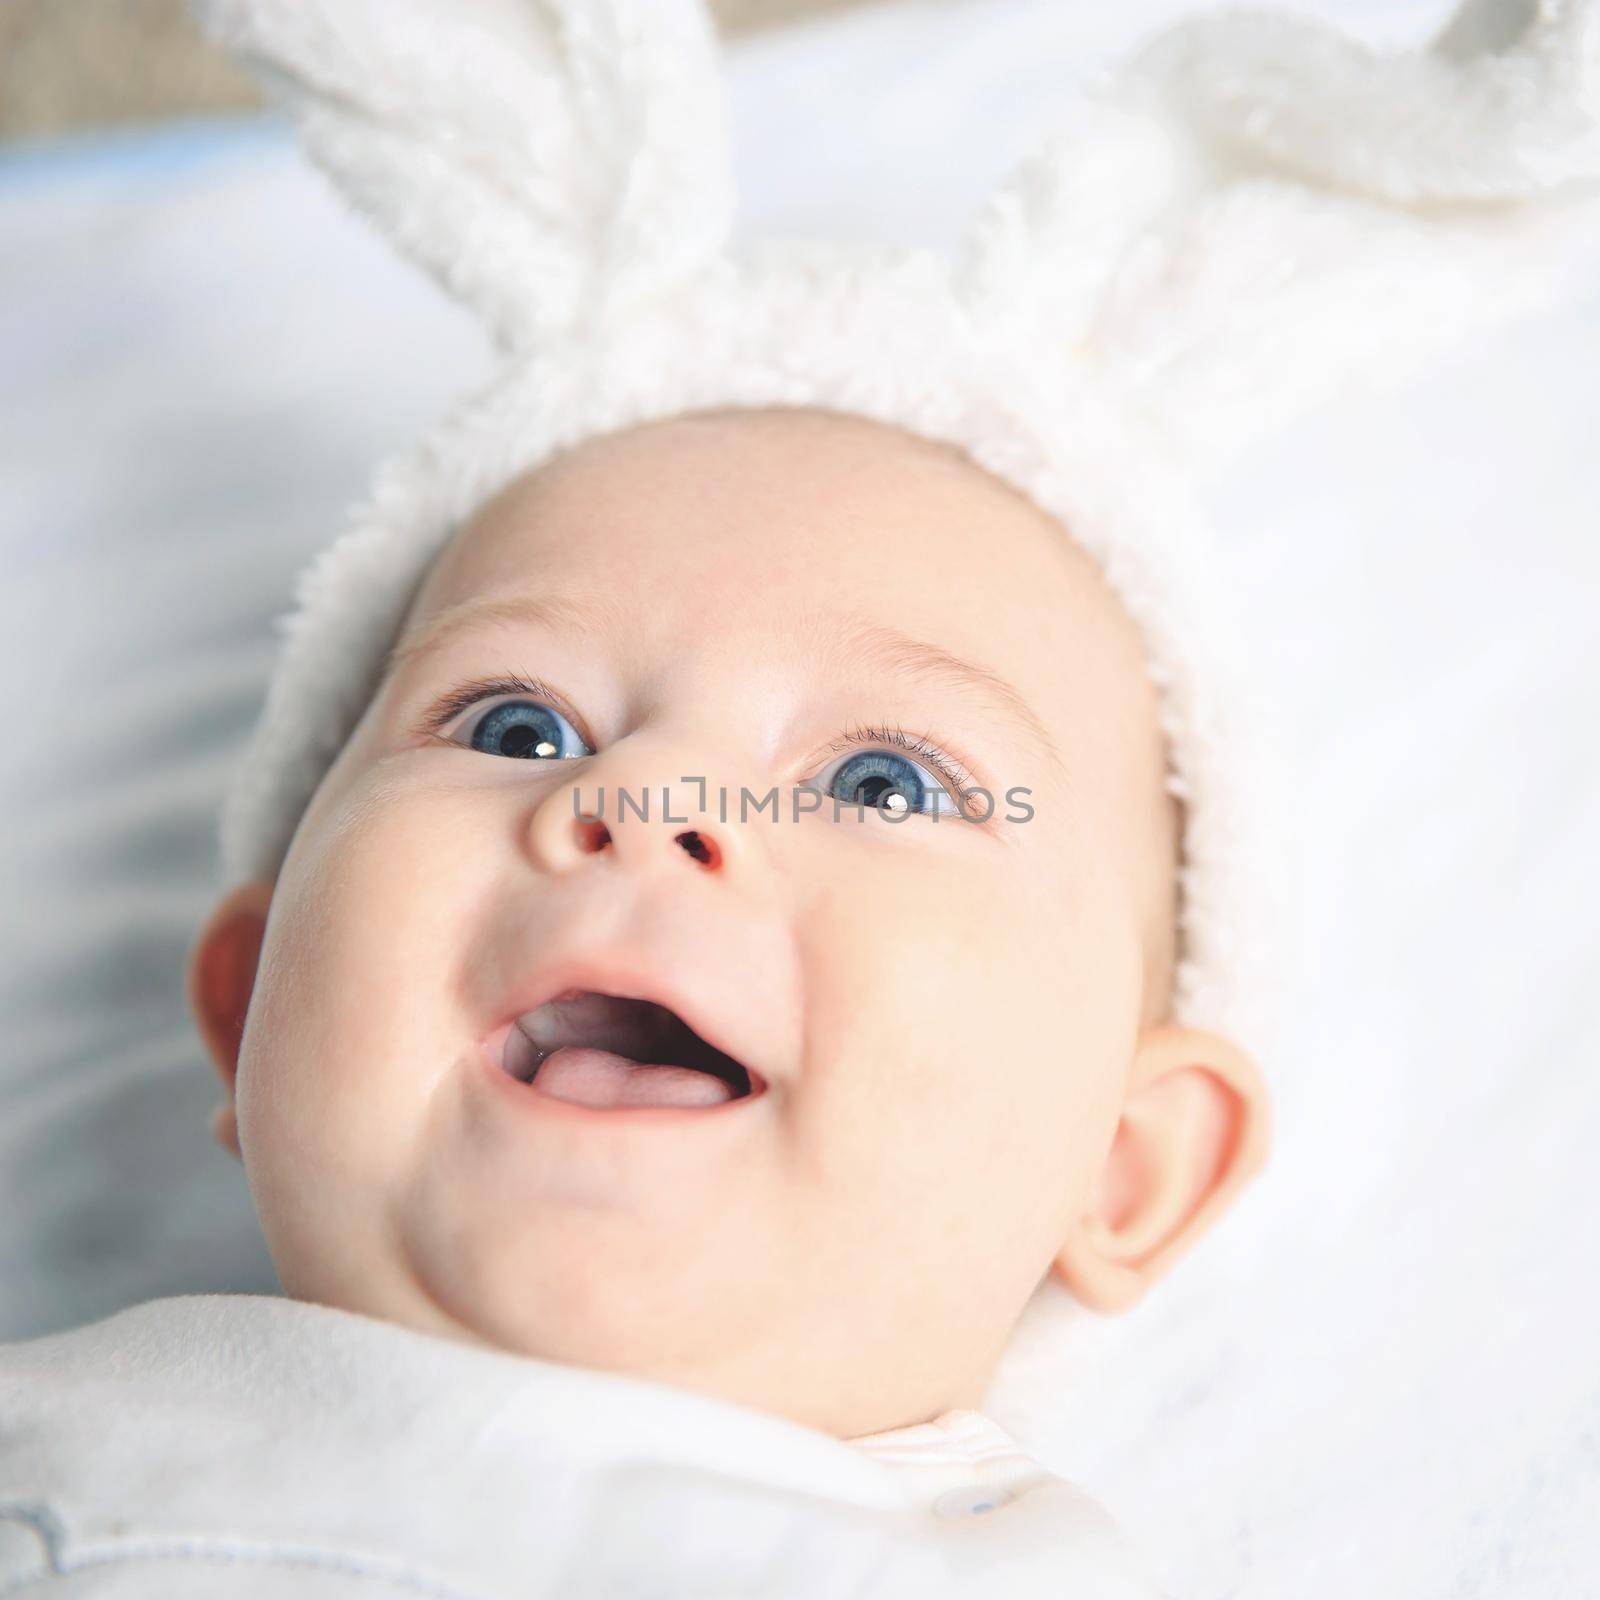 Portrait of an adorable baby in a bunny suit, smiling and looking away